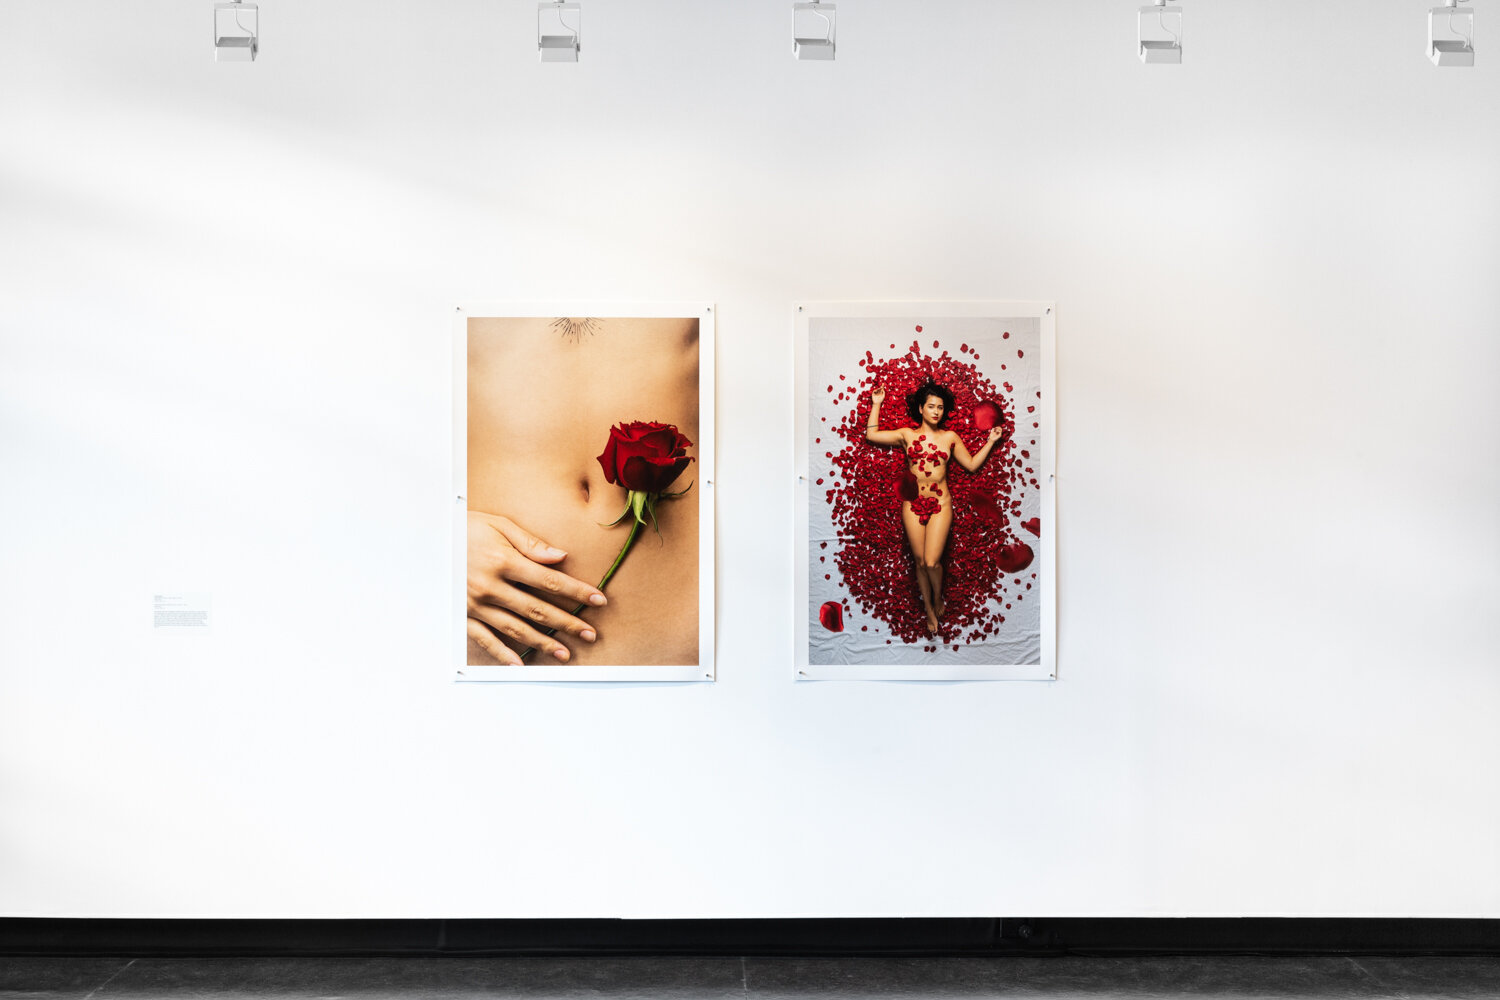  Andy Mullens.  Australasian Beauty 1 [film poster a]  and  Australasian Beauty 1 [film poster b] ,    2019, inkjet print, installation view,  Disobedient Daughters,  Counihan Gallery, 2021. Photo: Janelle Low 